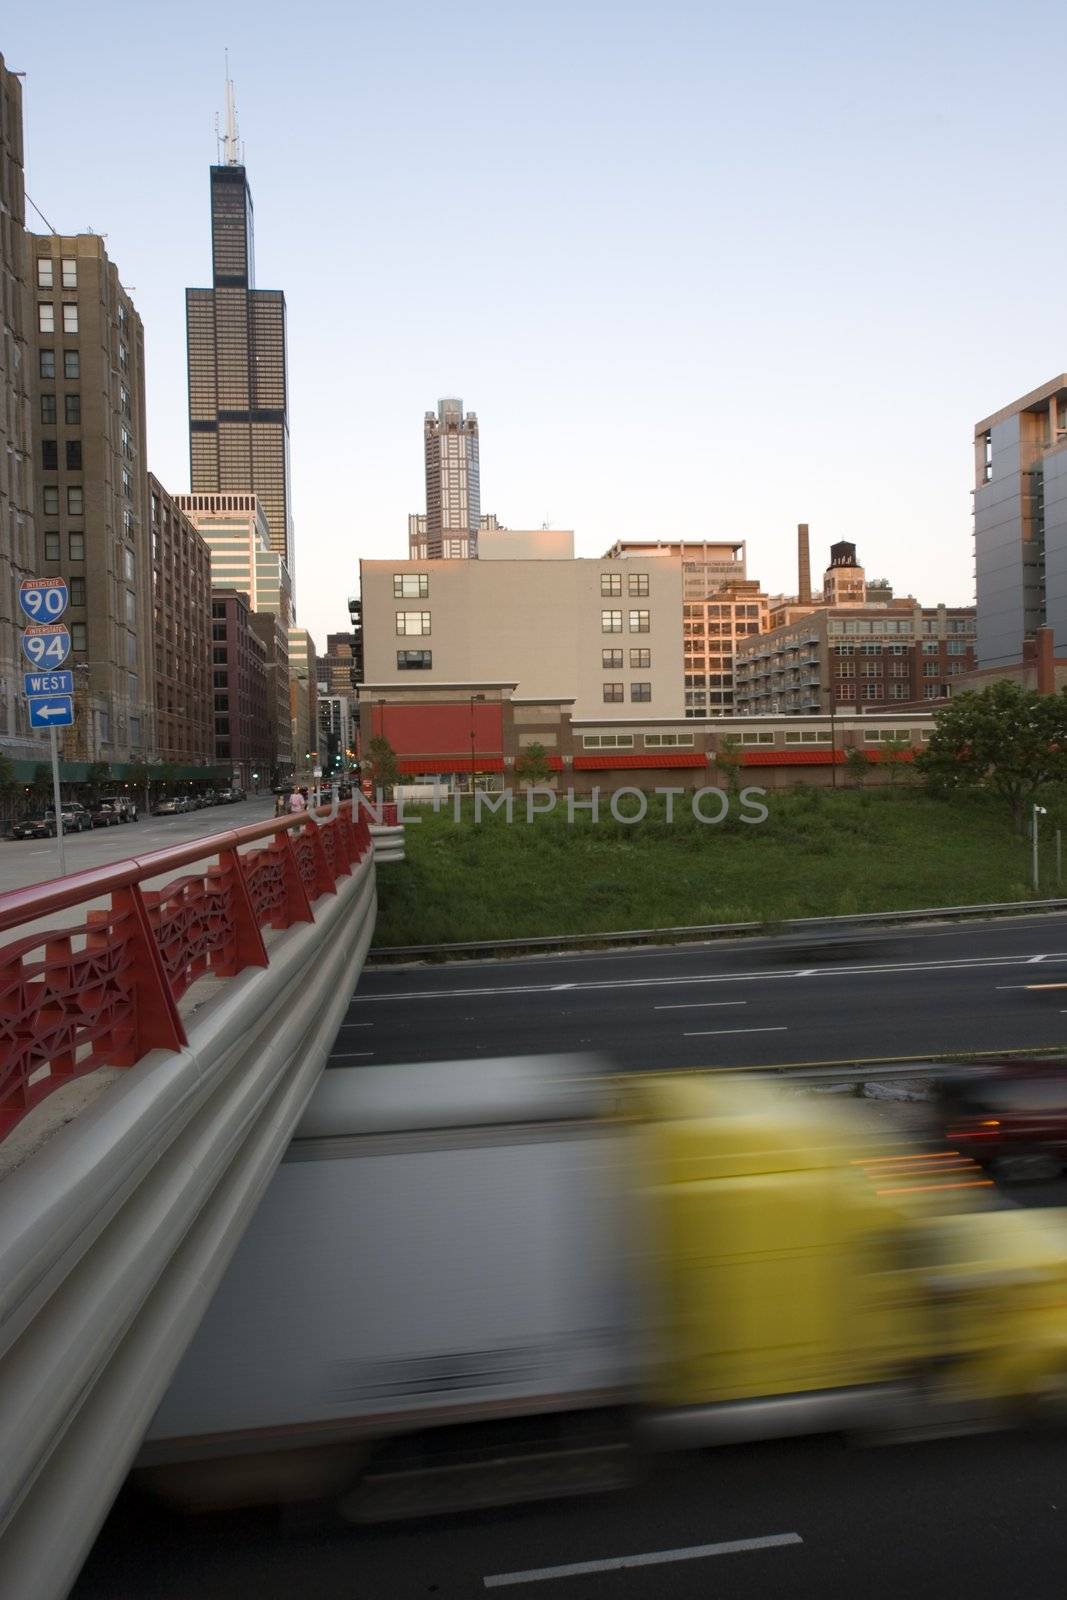 Blurred semi-truck driving expressway in downtown Chicago